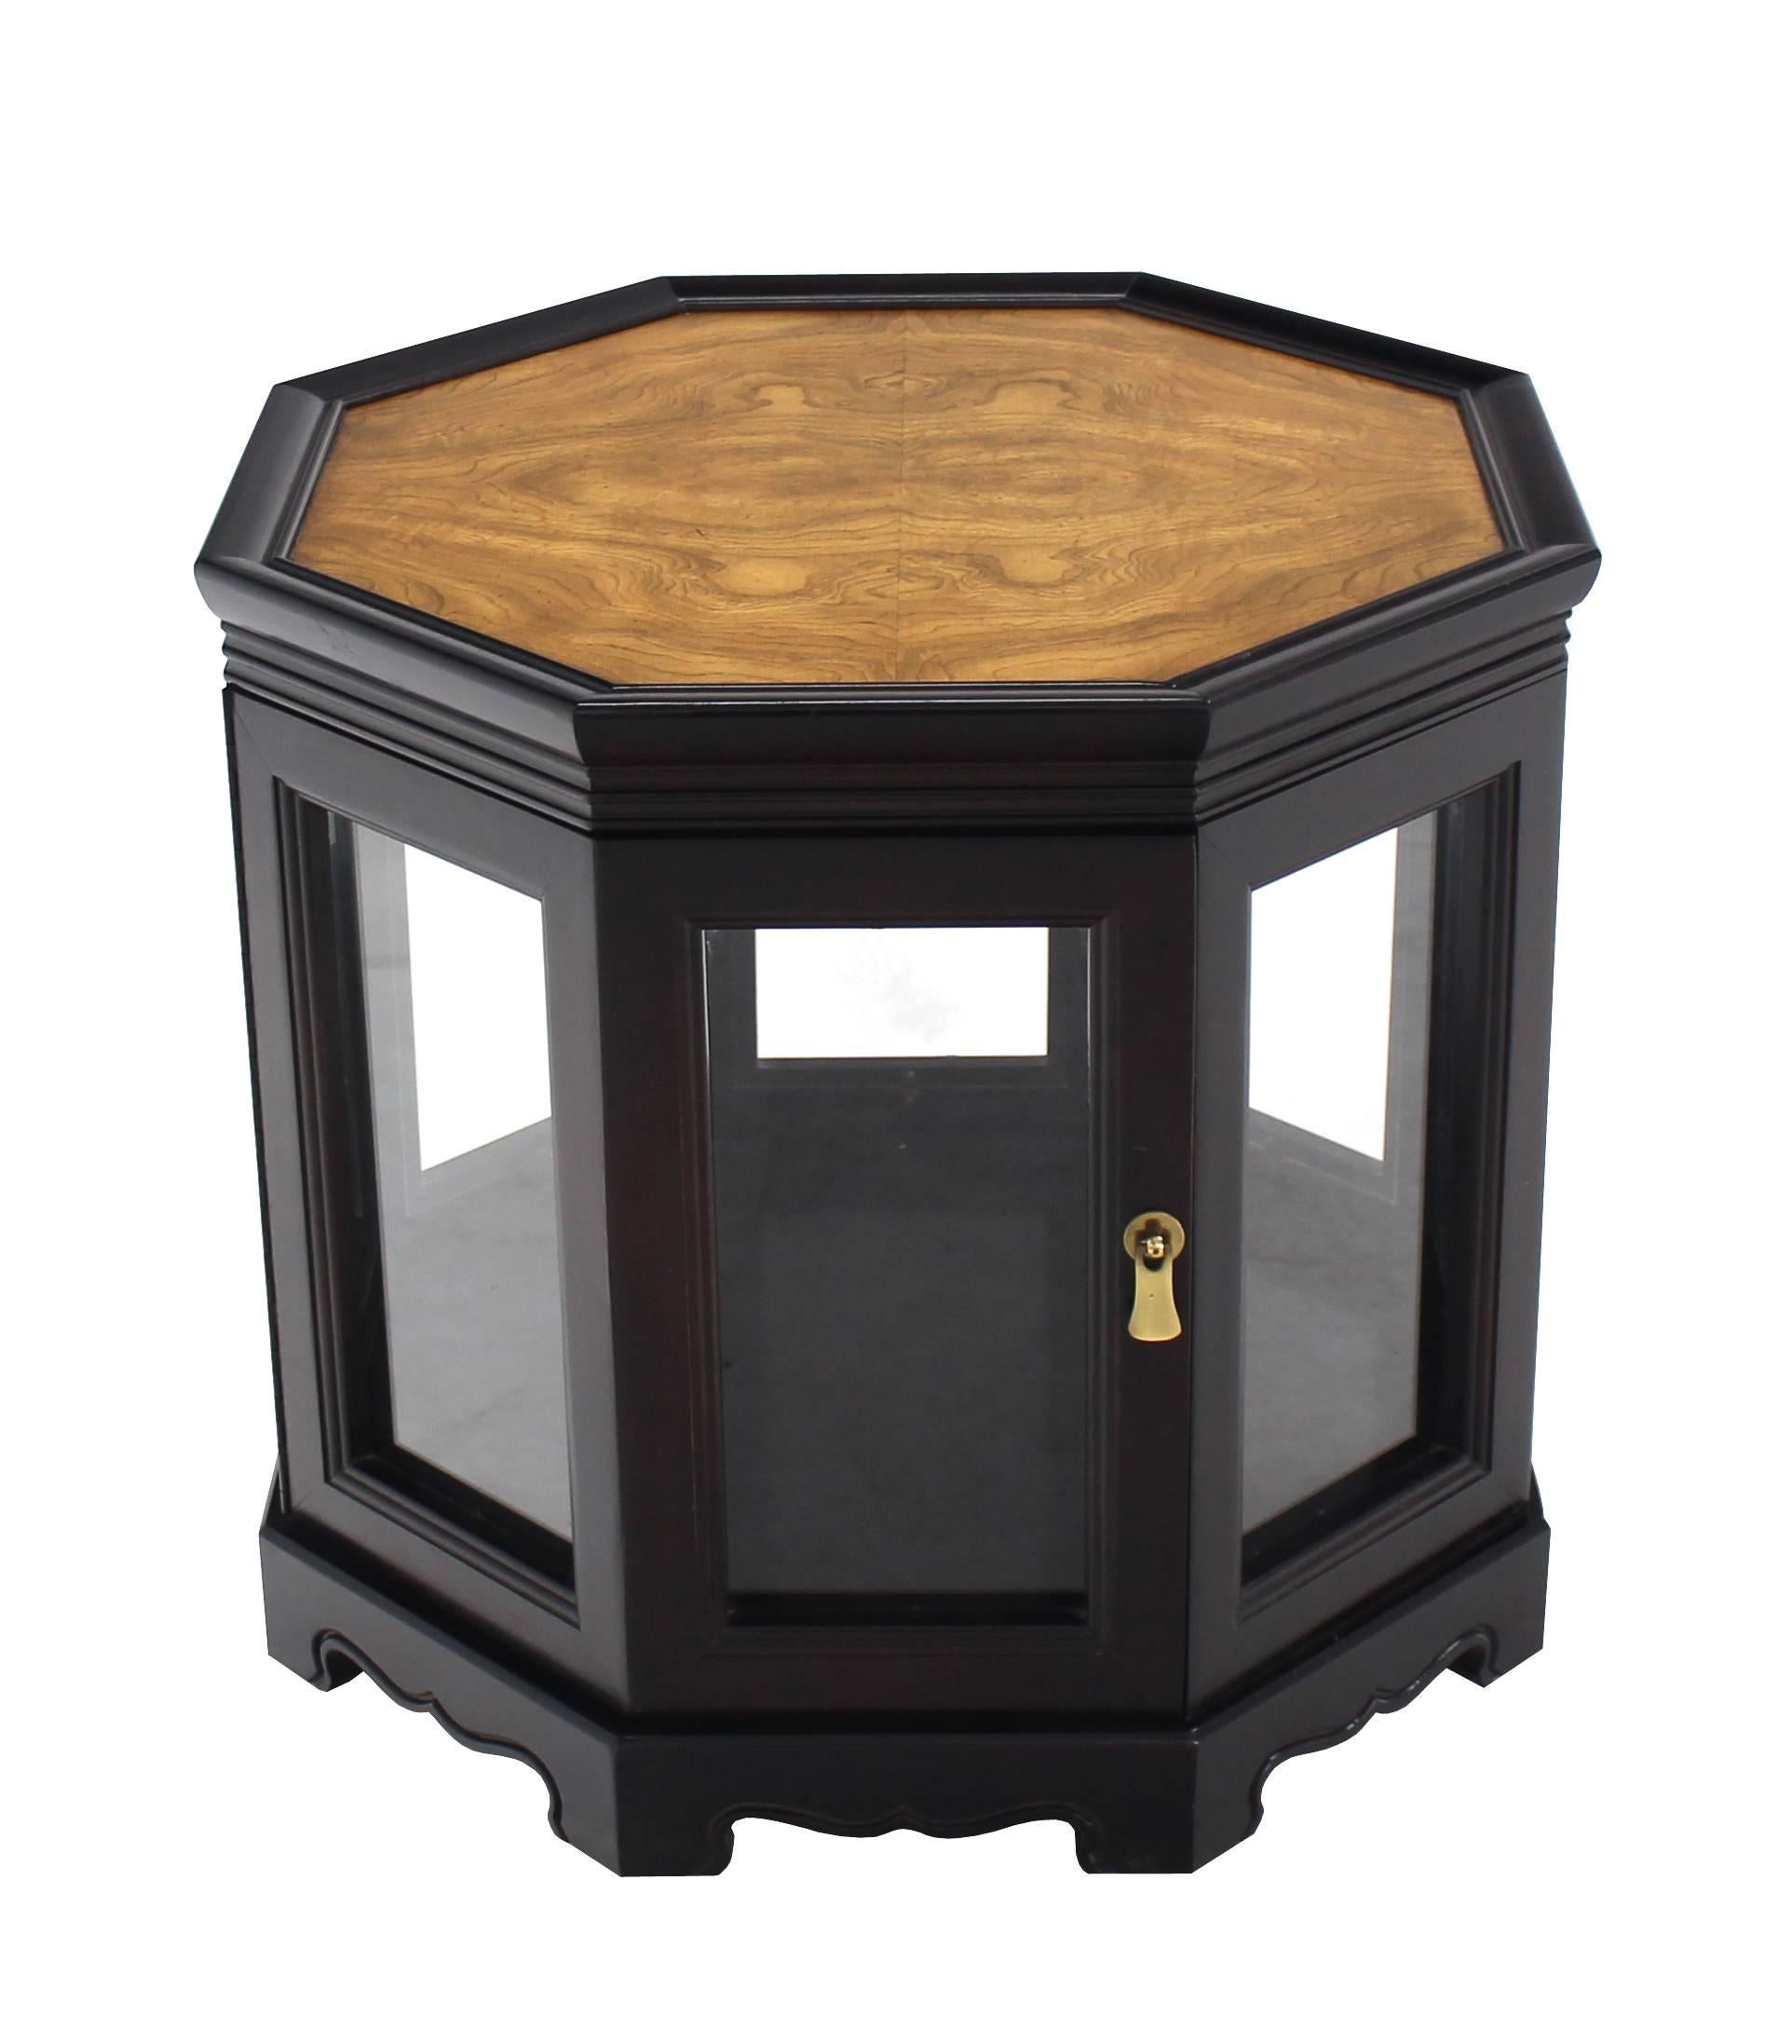 Very nice light up cabinet side table. Nice combination of burl wood and ebony finish.